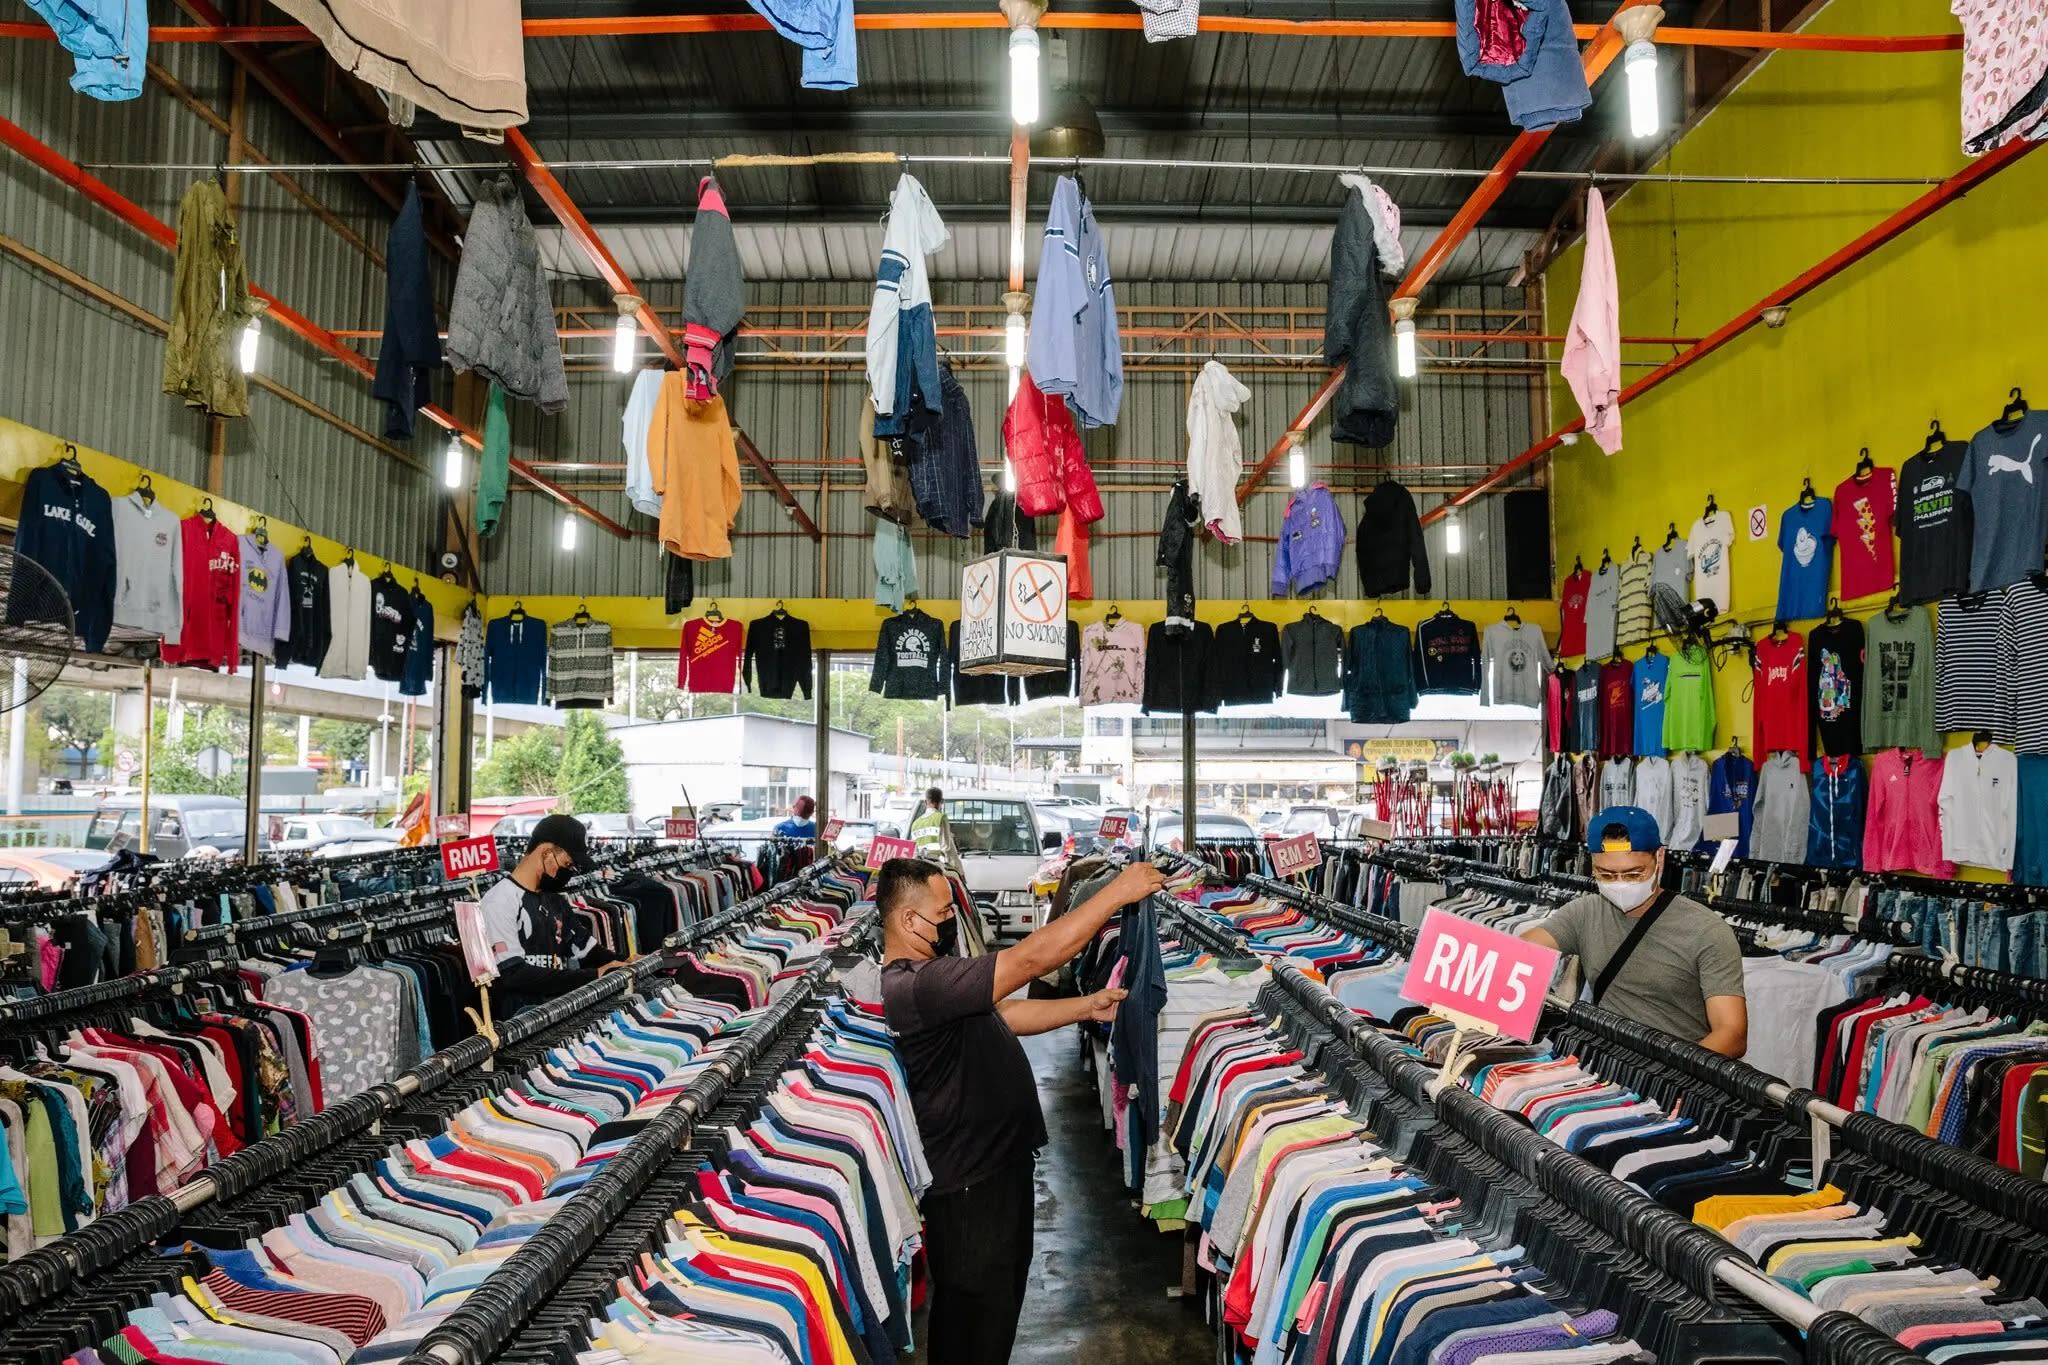 Sora Bundle in Kuala Lumpur, Malaysia, is one of many secondhand stores in the country.